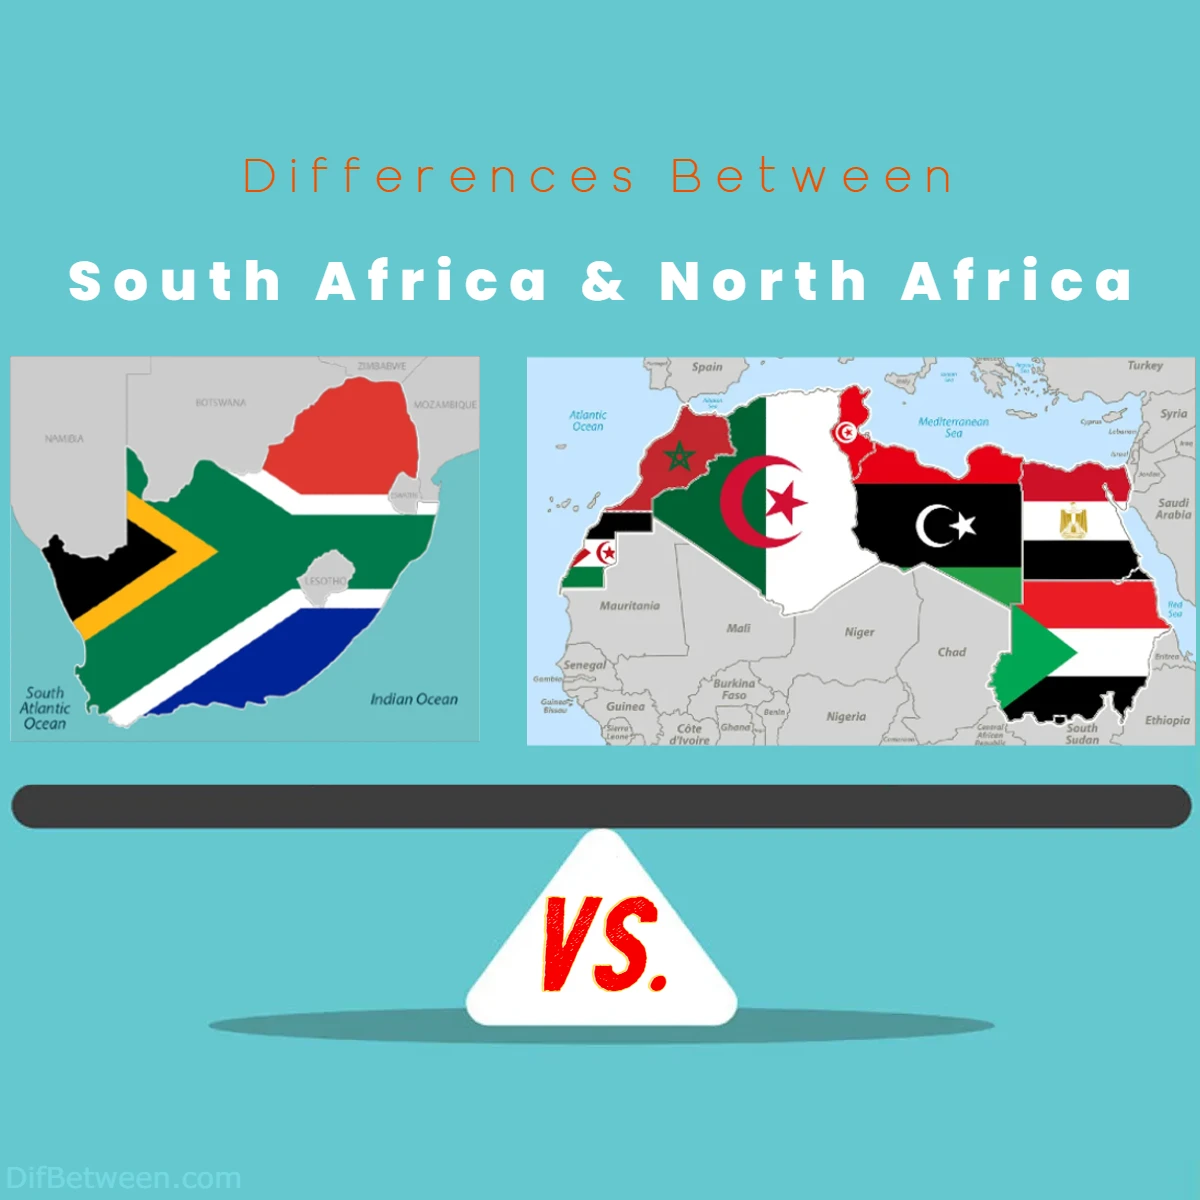 Differences Between South Africa vs North Africa